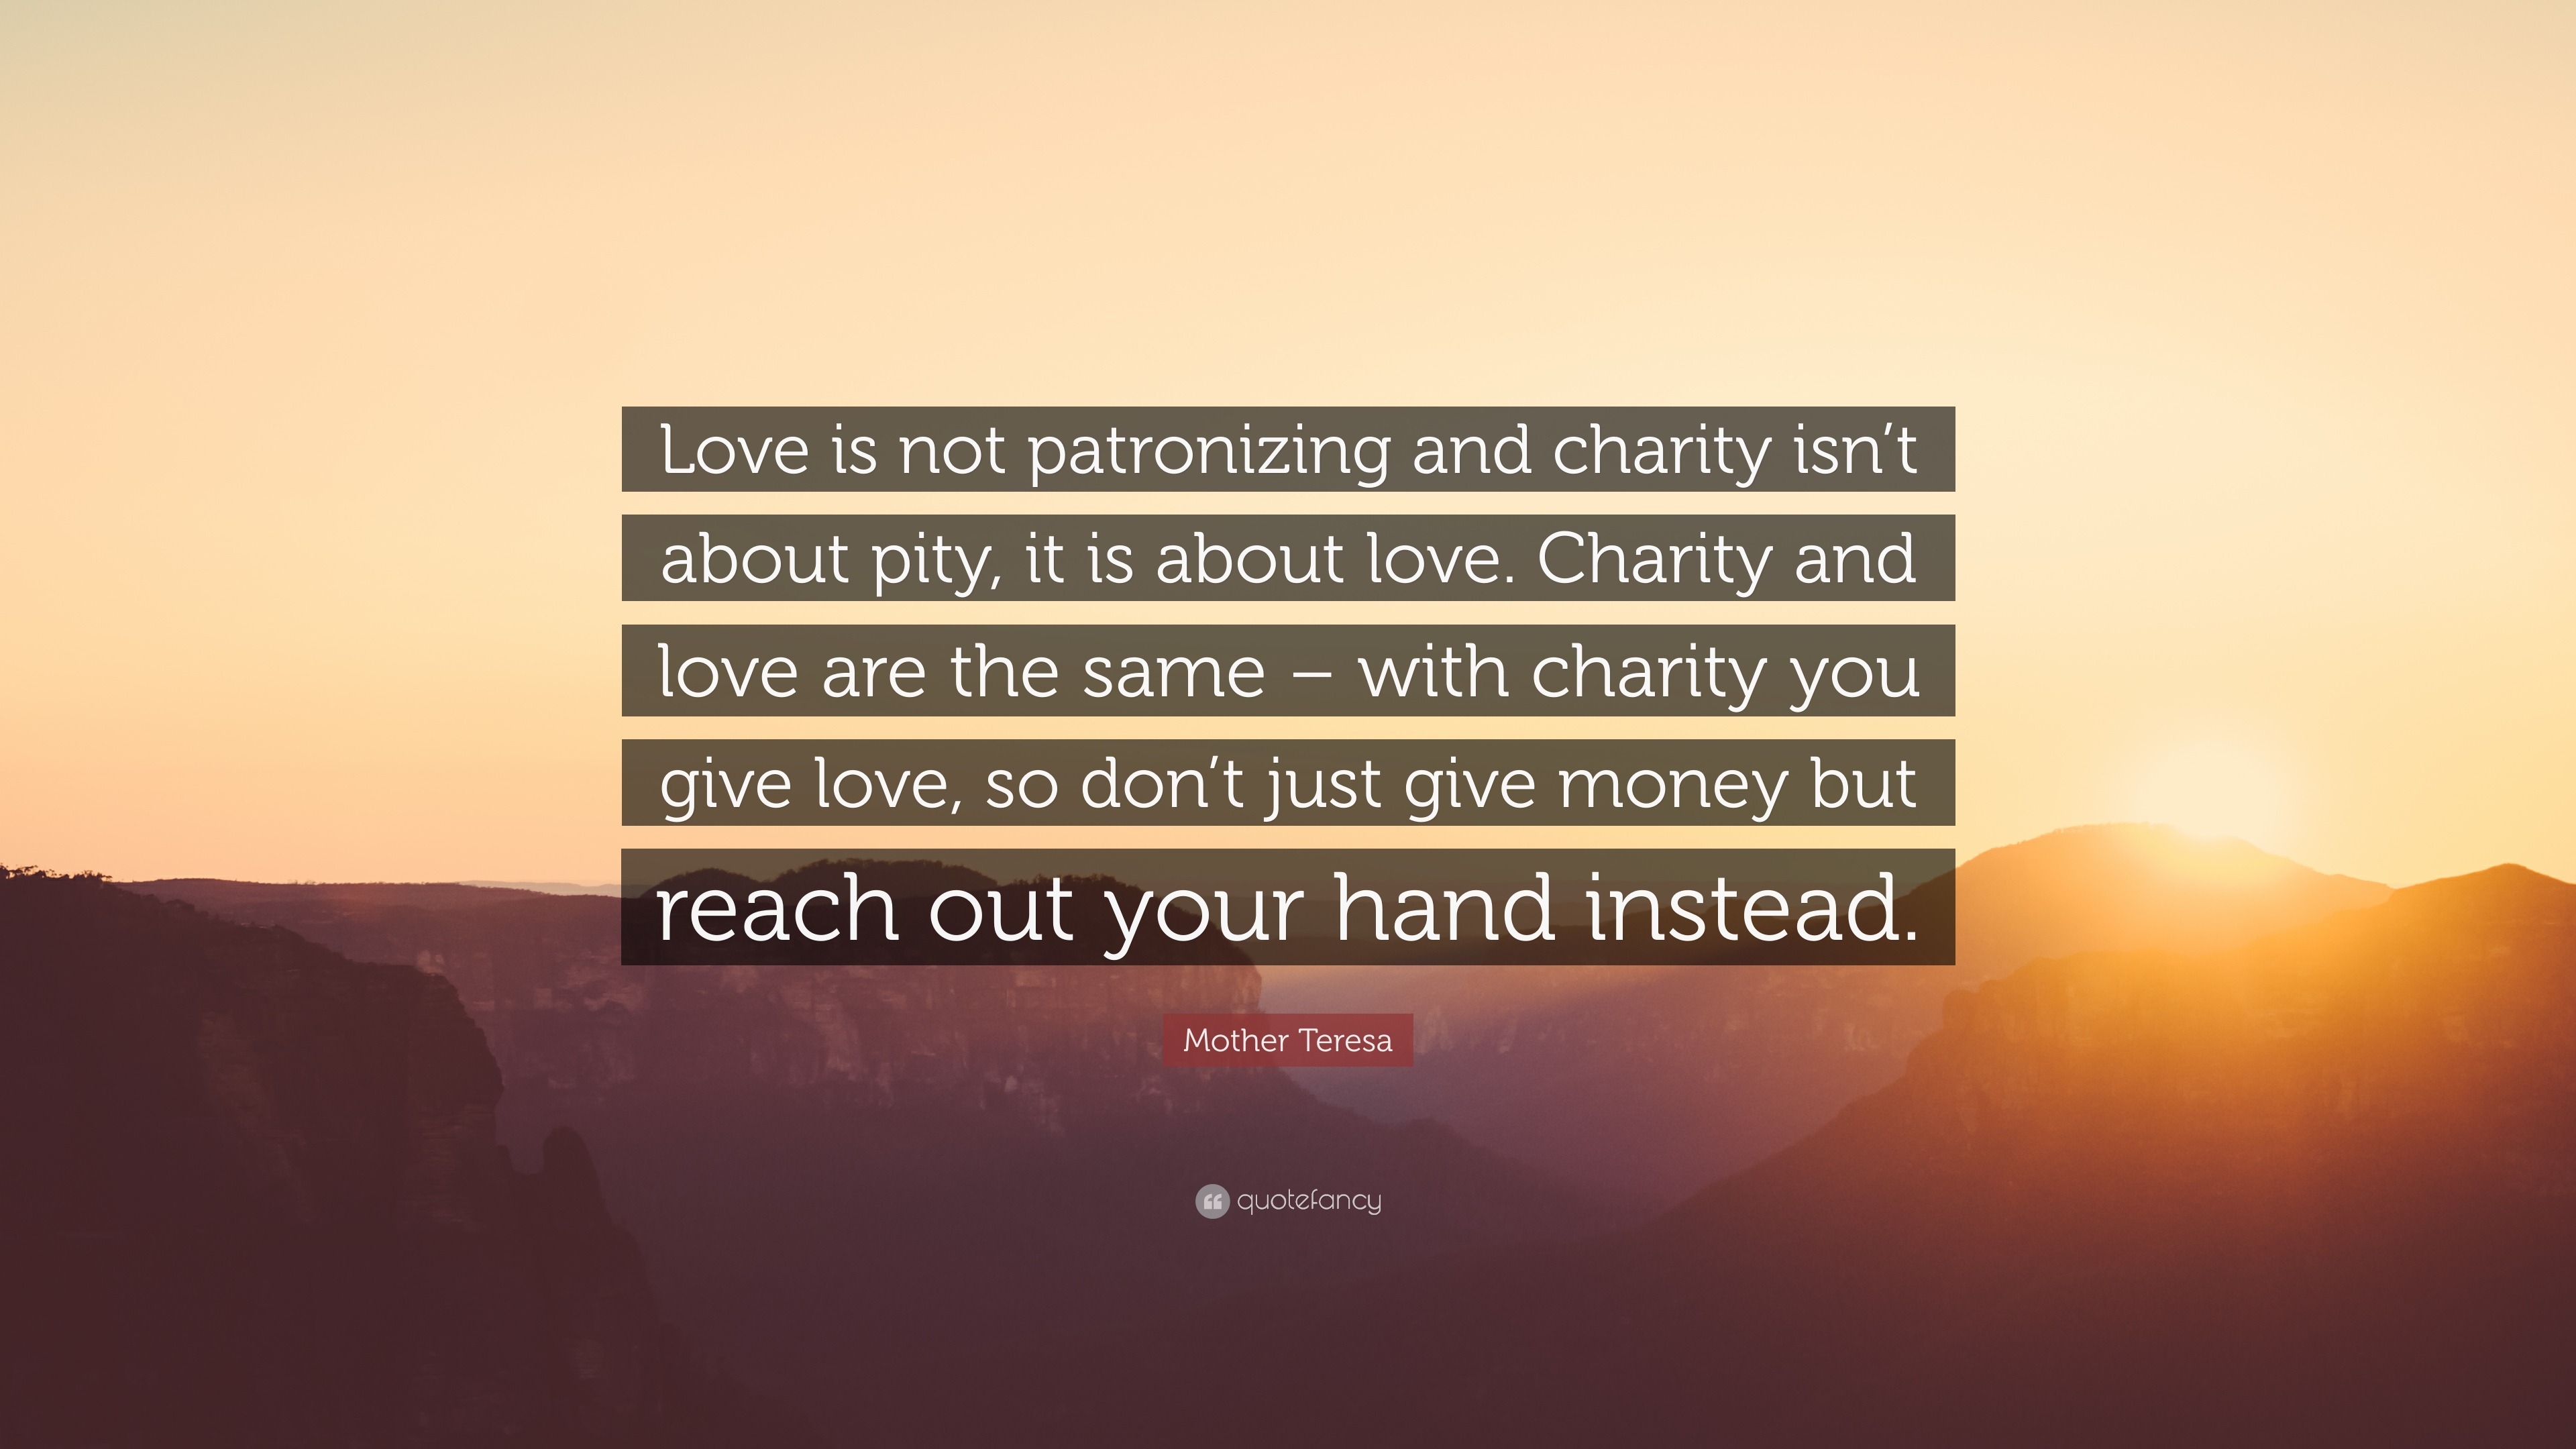 Mother Teresa Quote “Love is not patronizing and charity isn t about pity